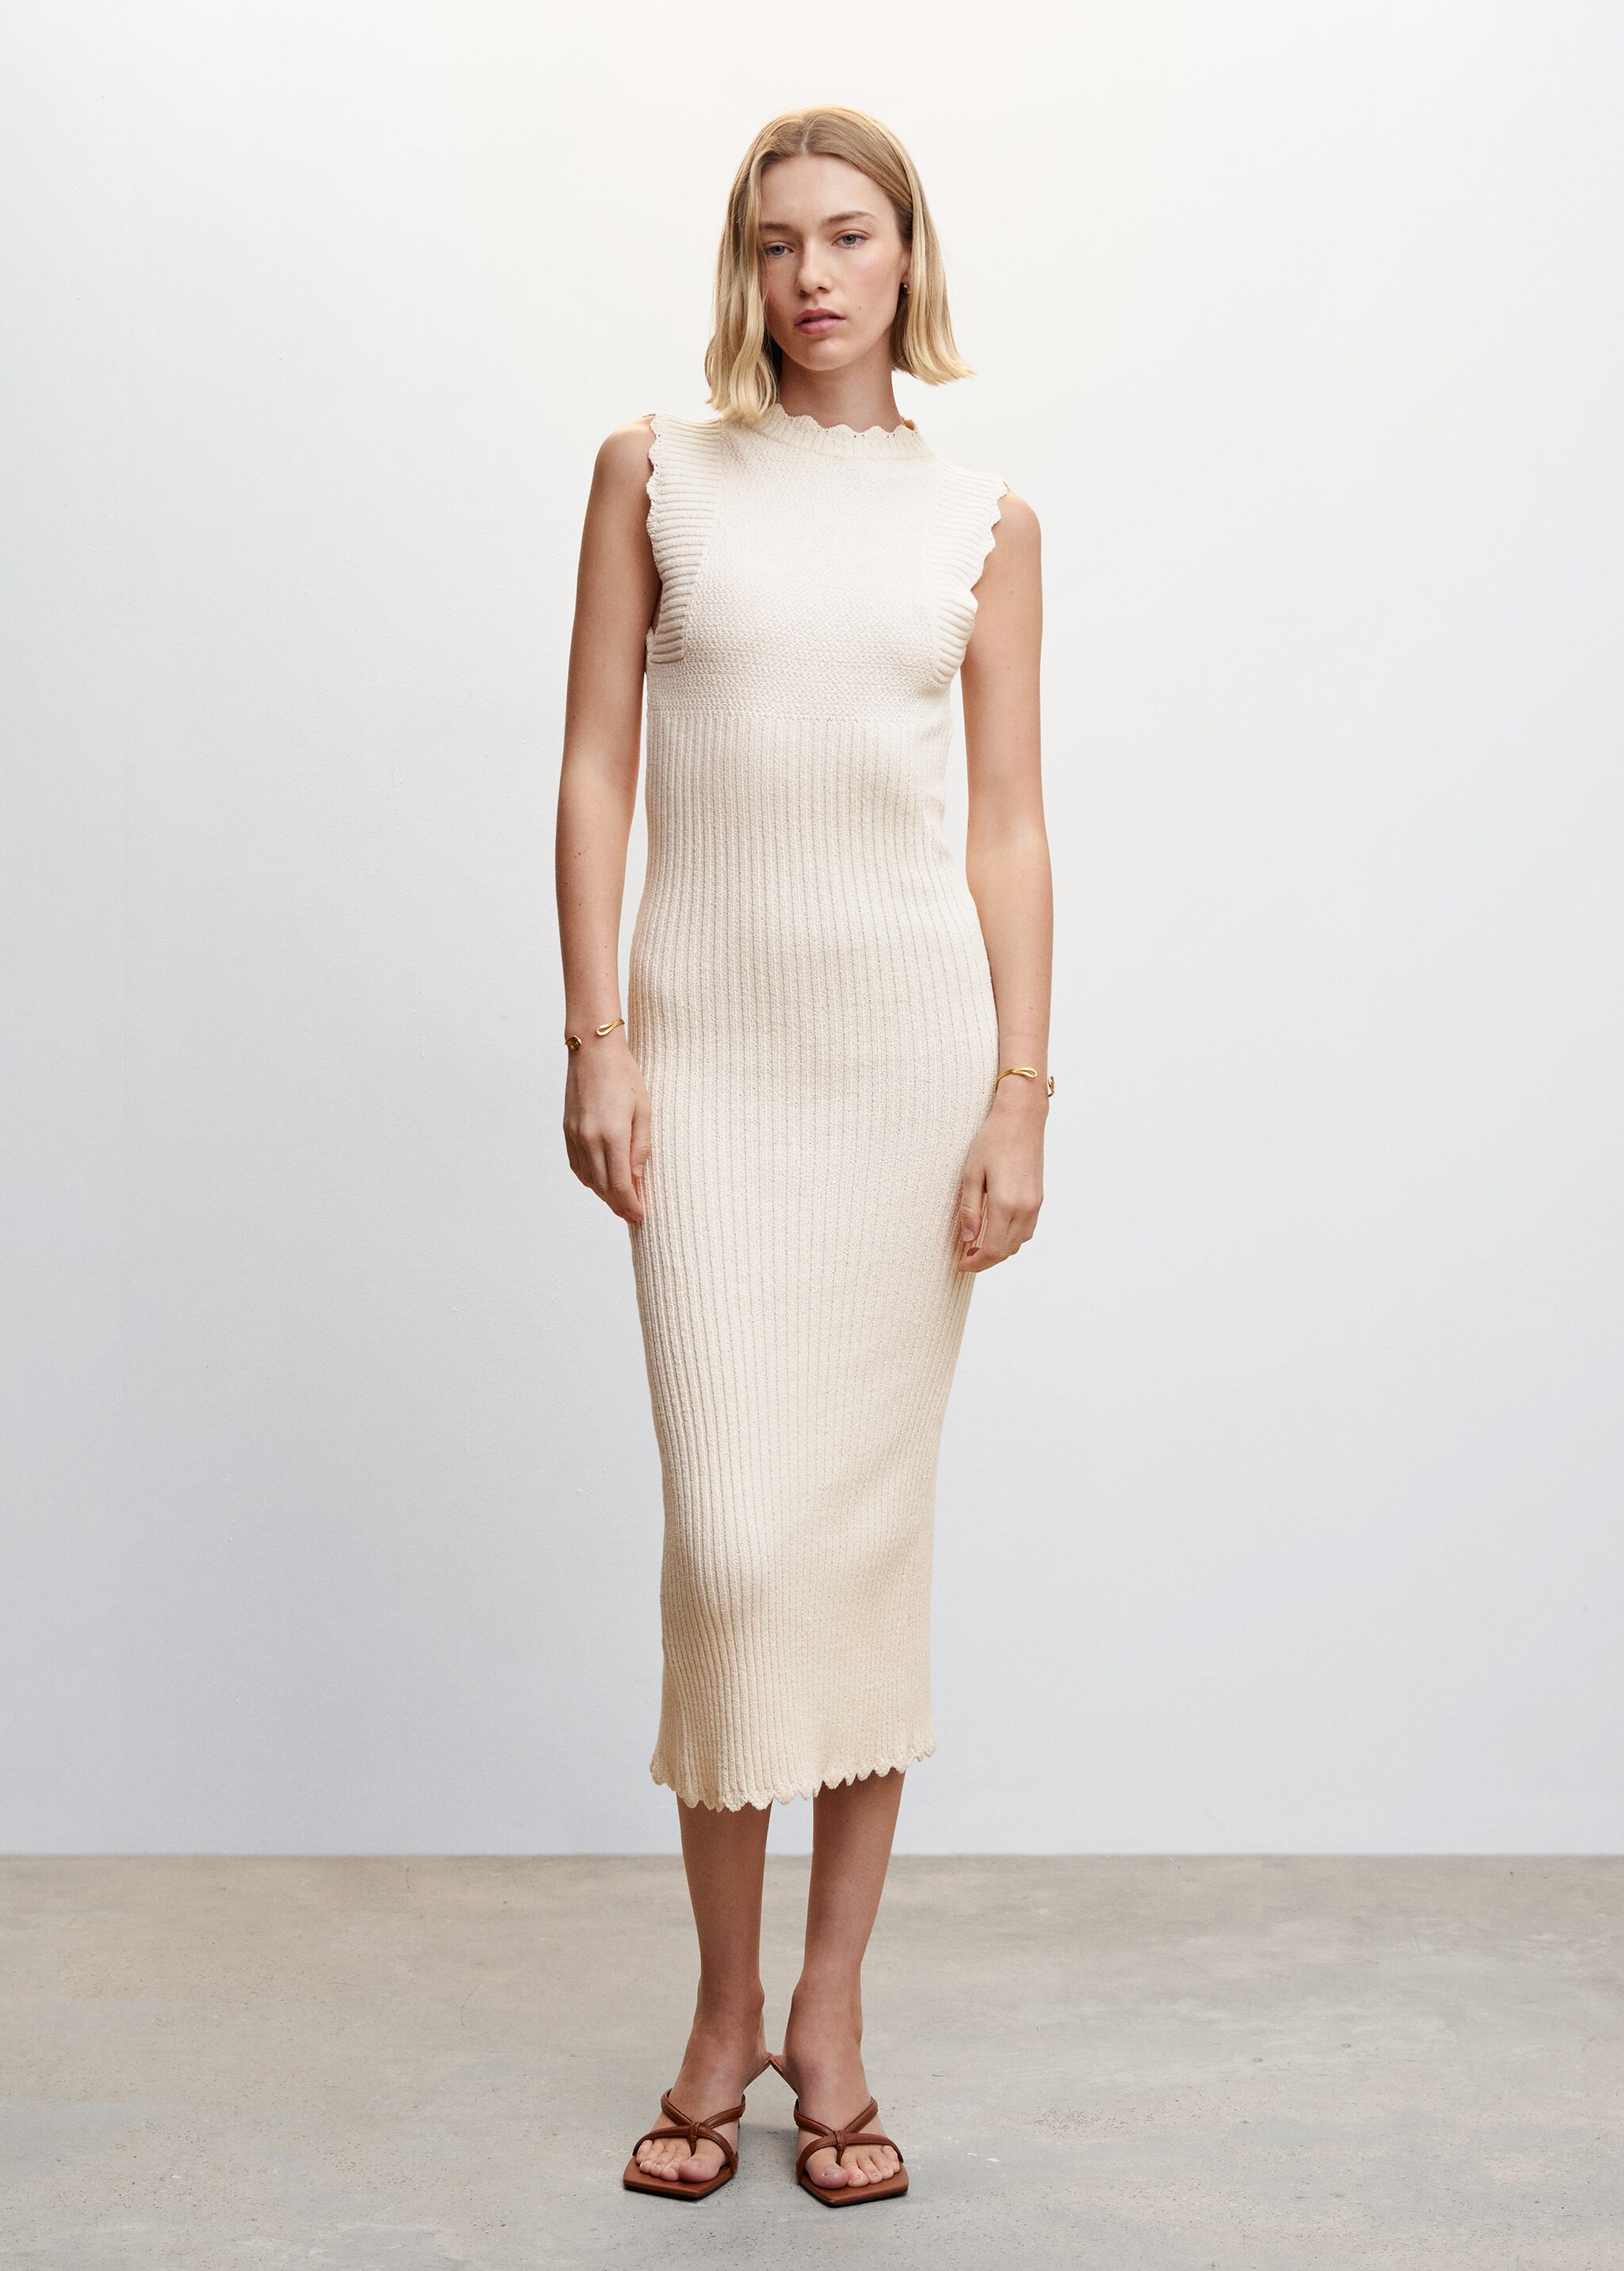 Knitted dress with open back - General plane